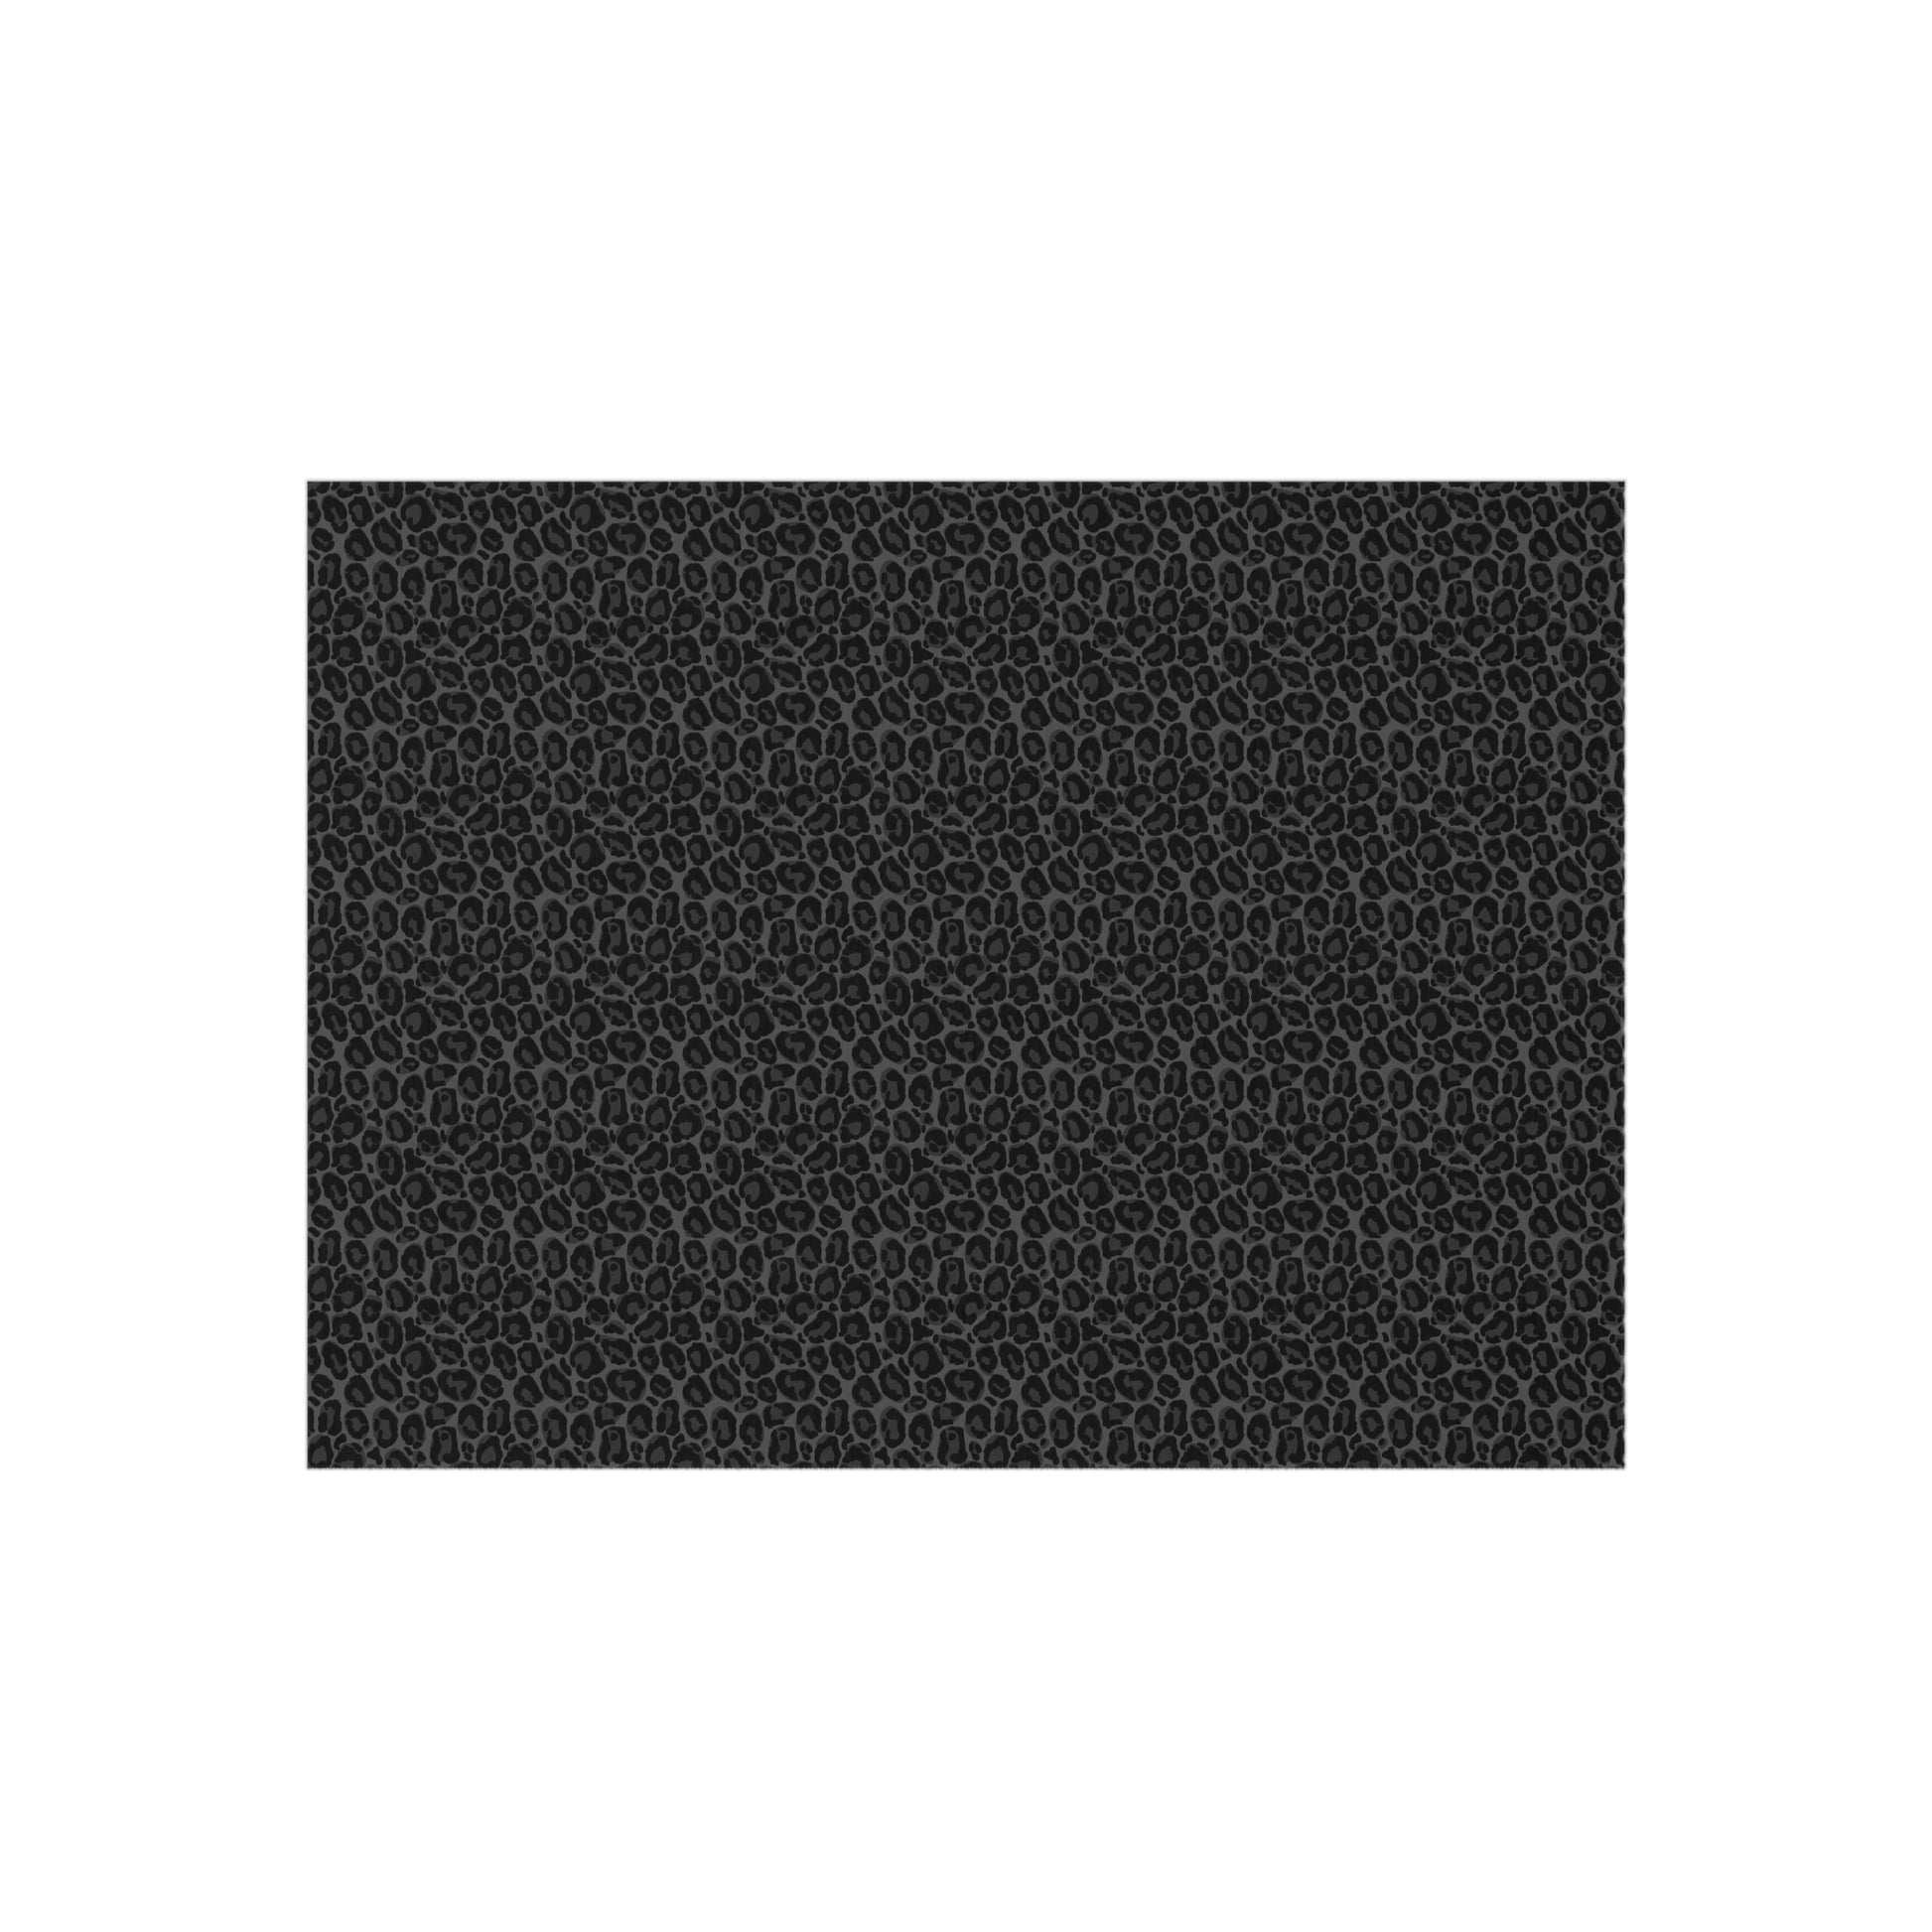 Black Leopard Outdoor Area Rug, Animal Print Waterproof Carpet Home Floor Decor Large 2x3 4x6 3x5 5x7 9x10 Patio Small Large Camping Mat Starcove Fashion